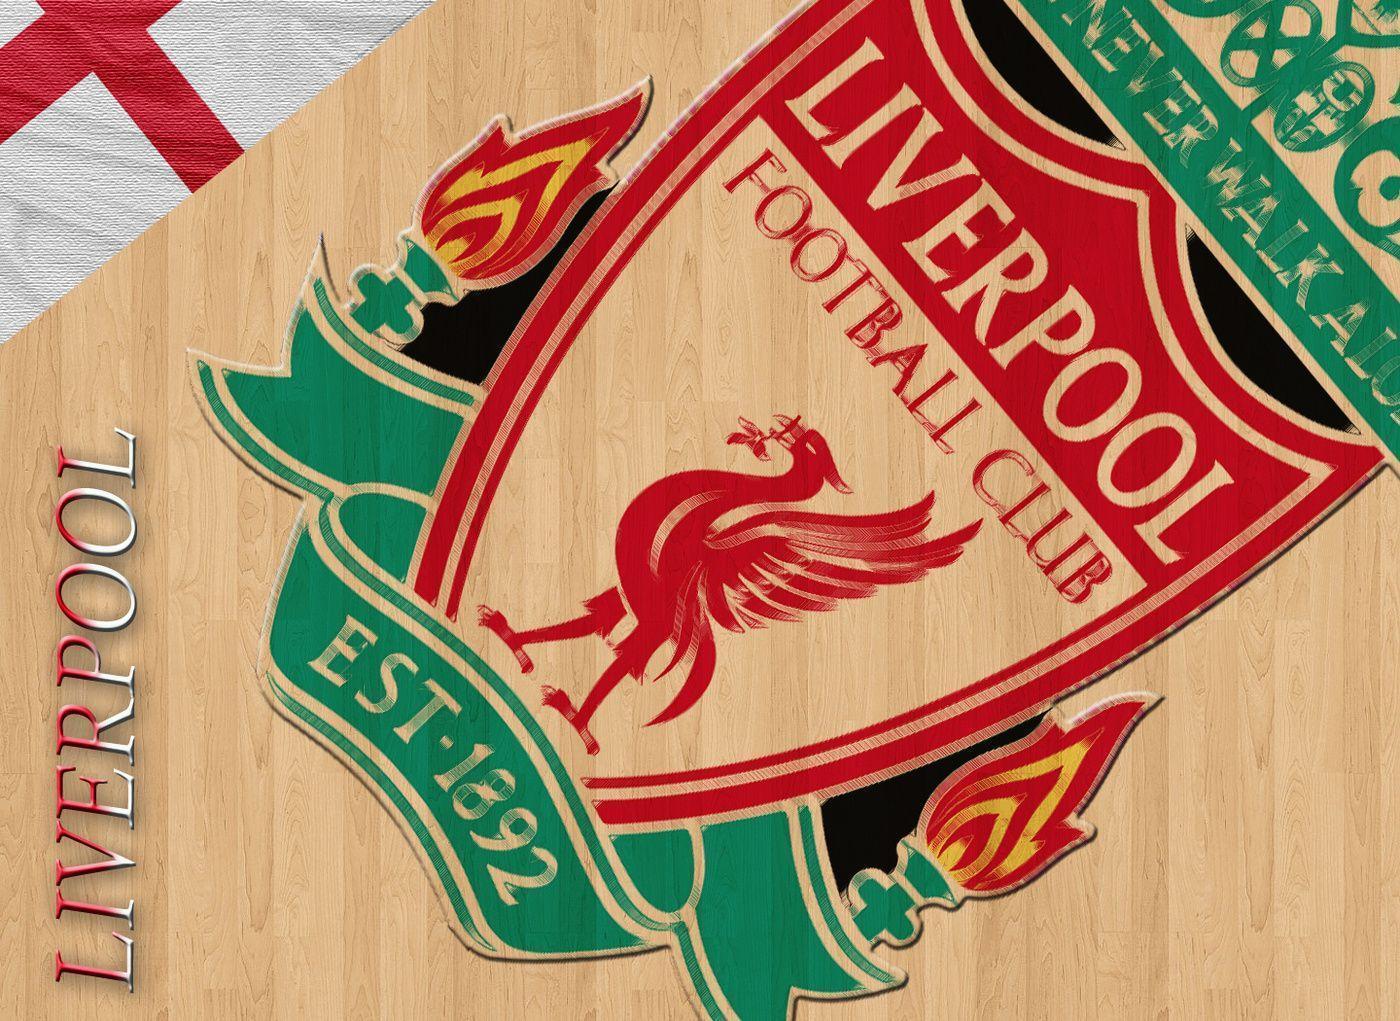 image about Liverpool Fc Image. Liverpool fc